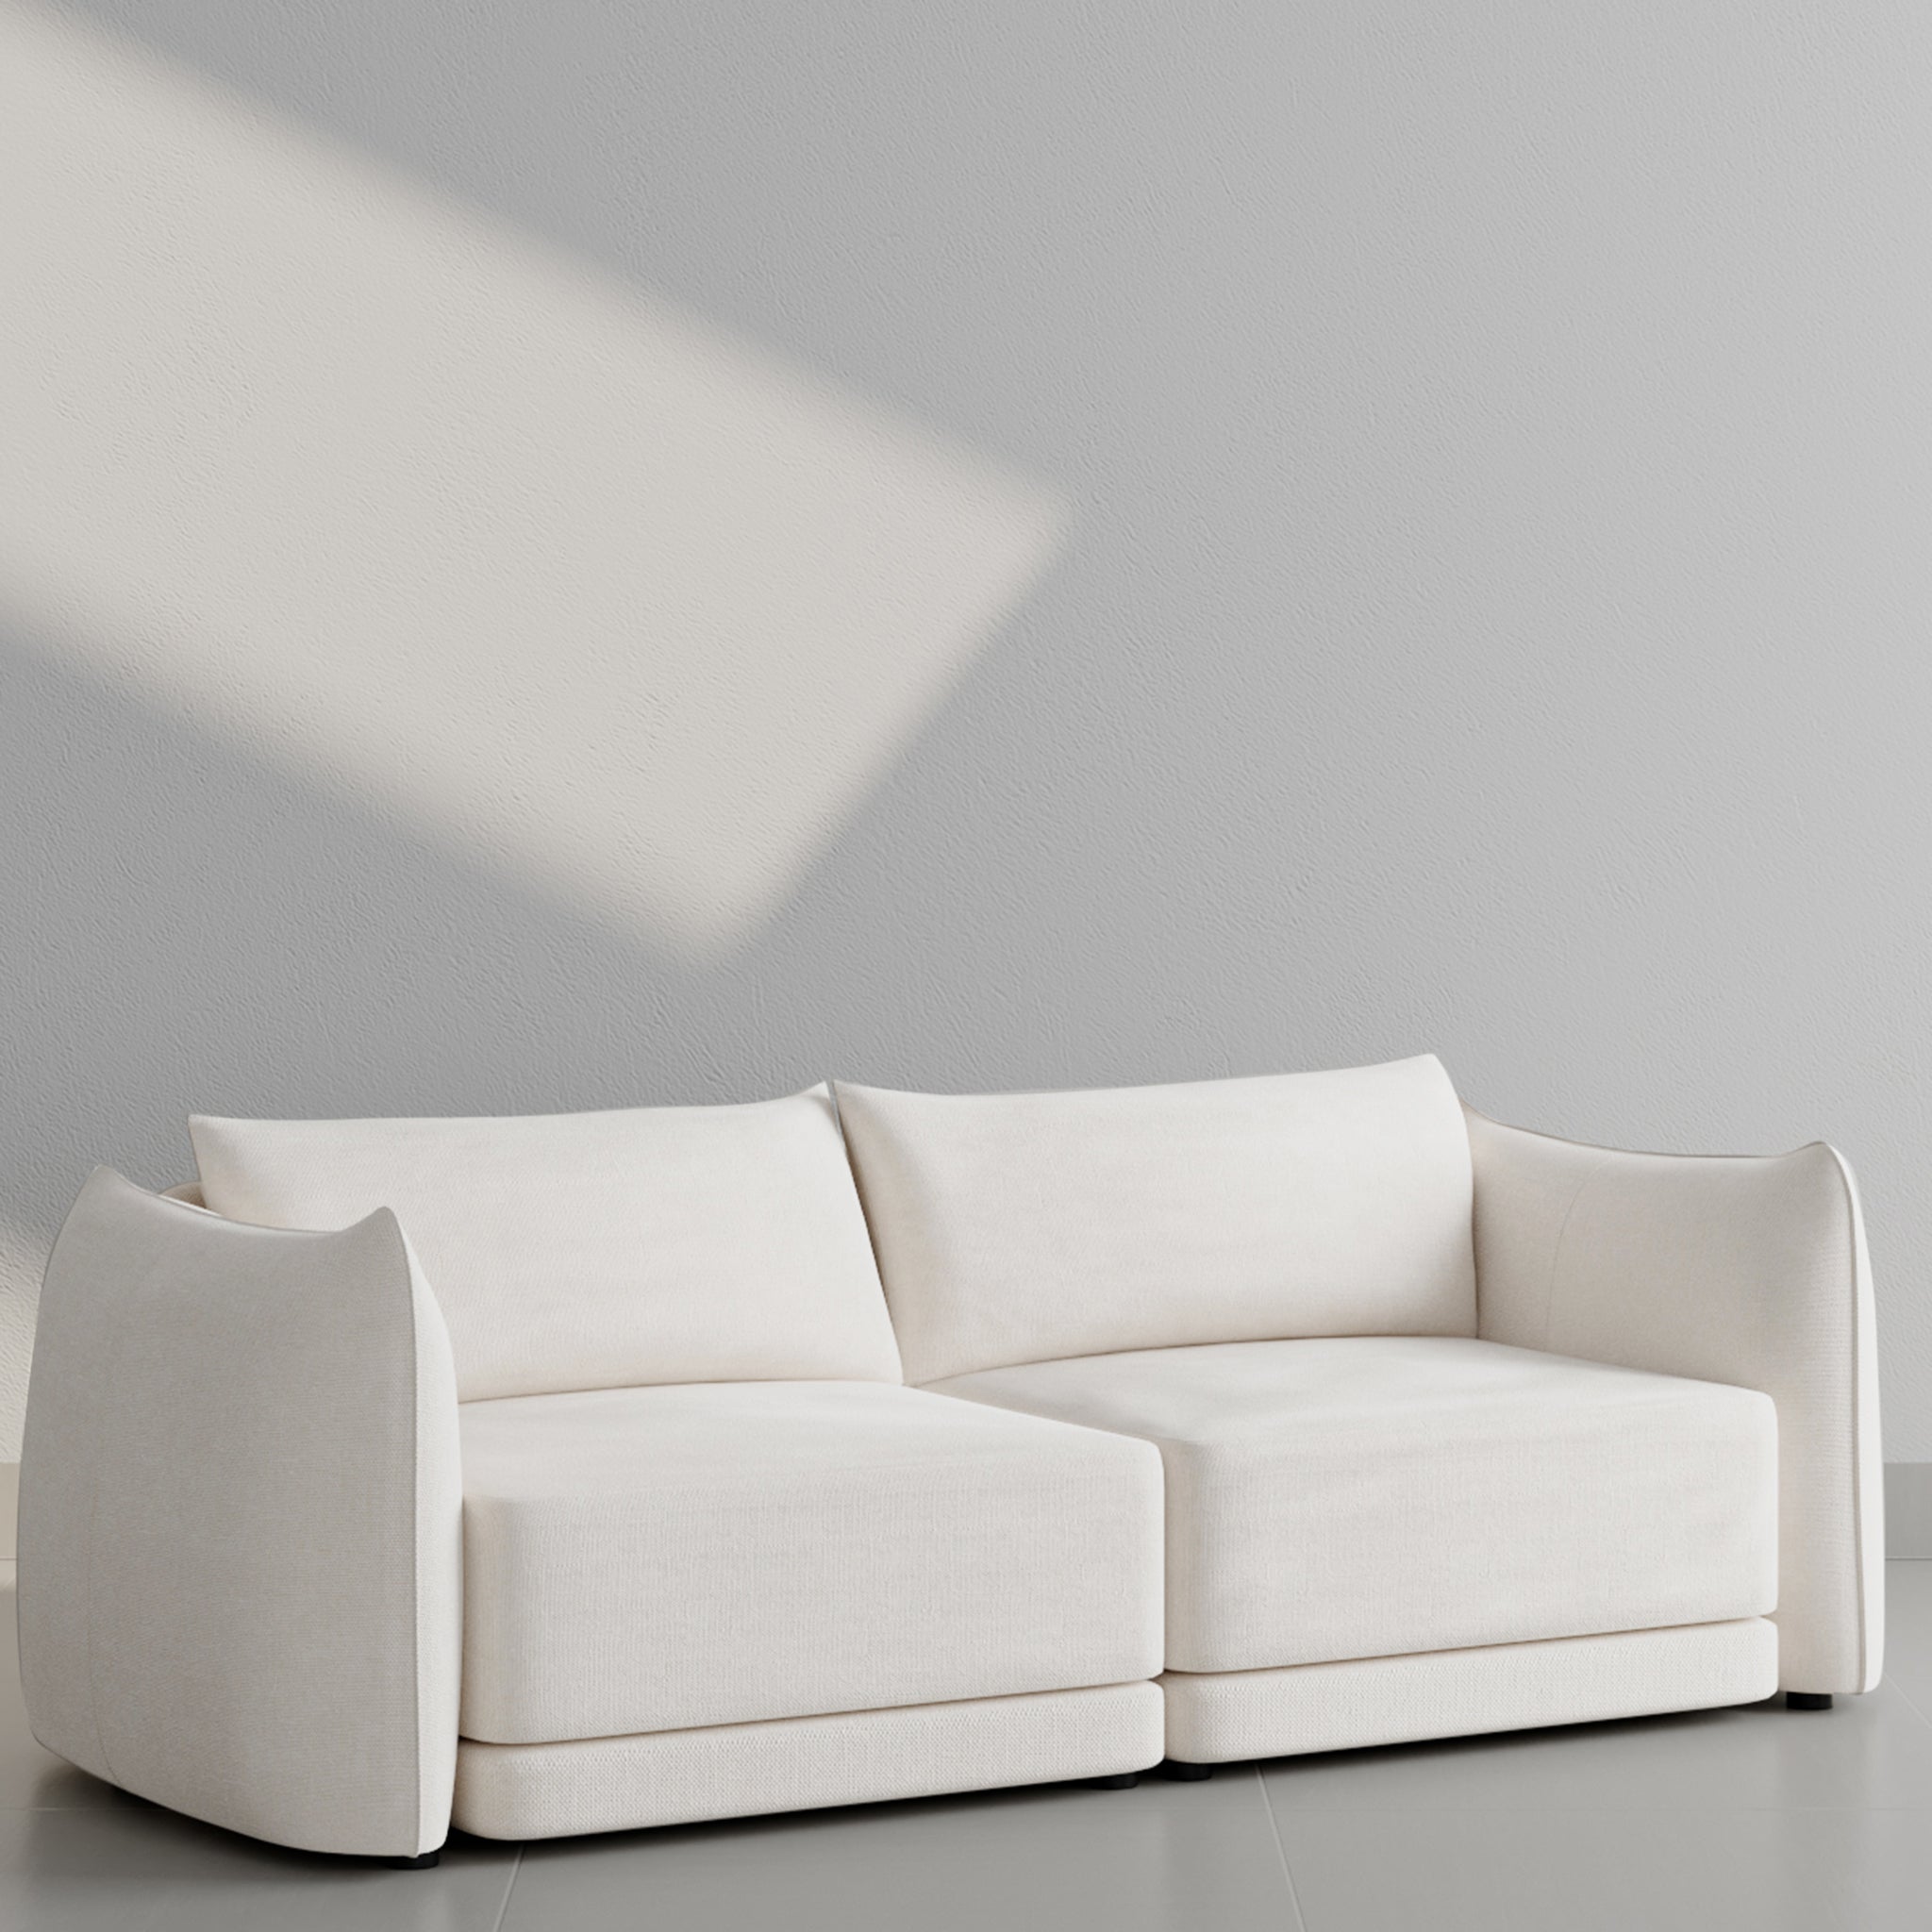 Modern white sofa with curved armrests against a light gray wall, featuring soft cushions and minimalist design.